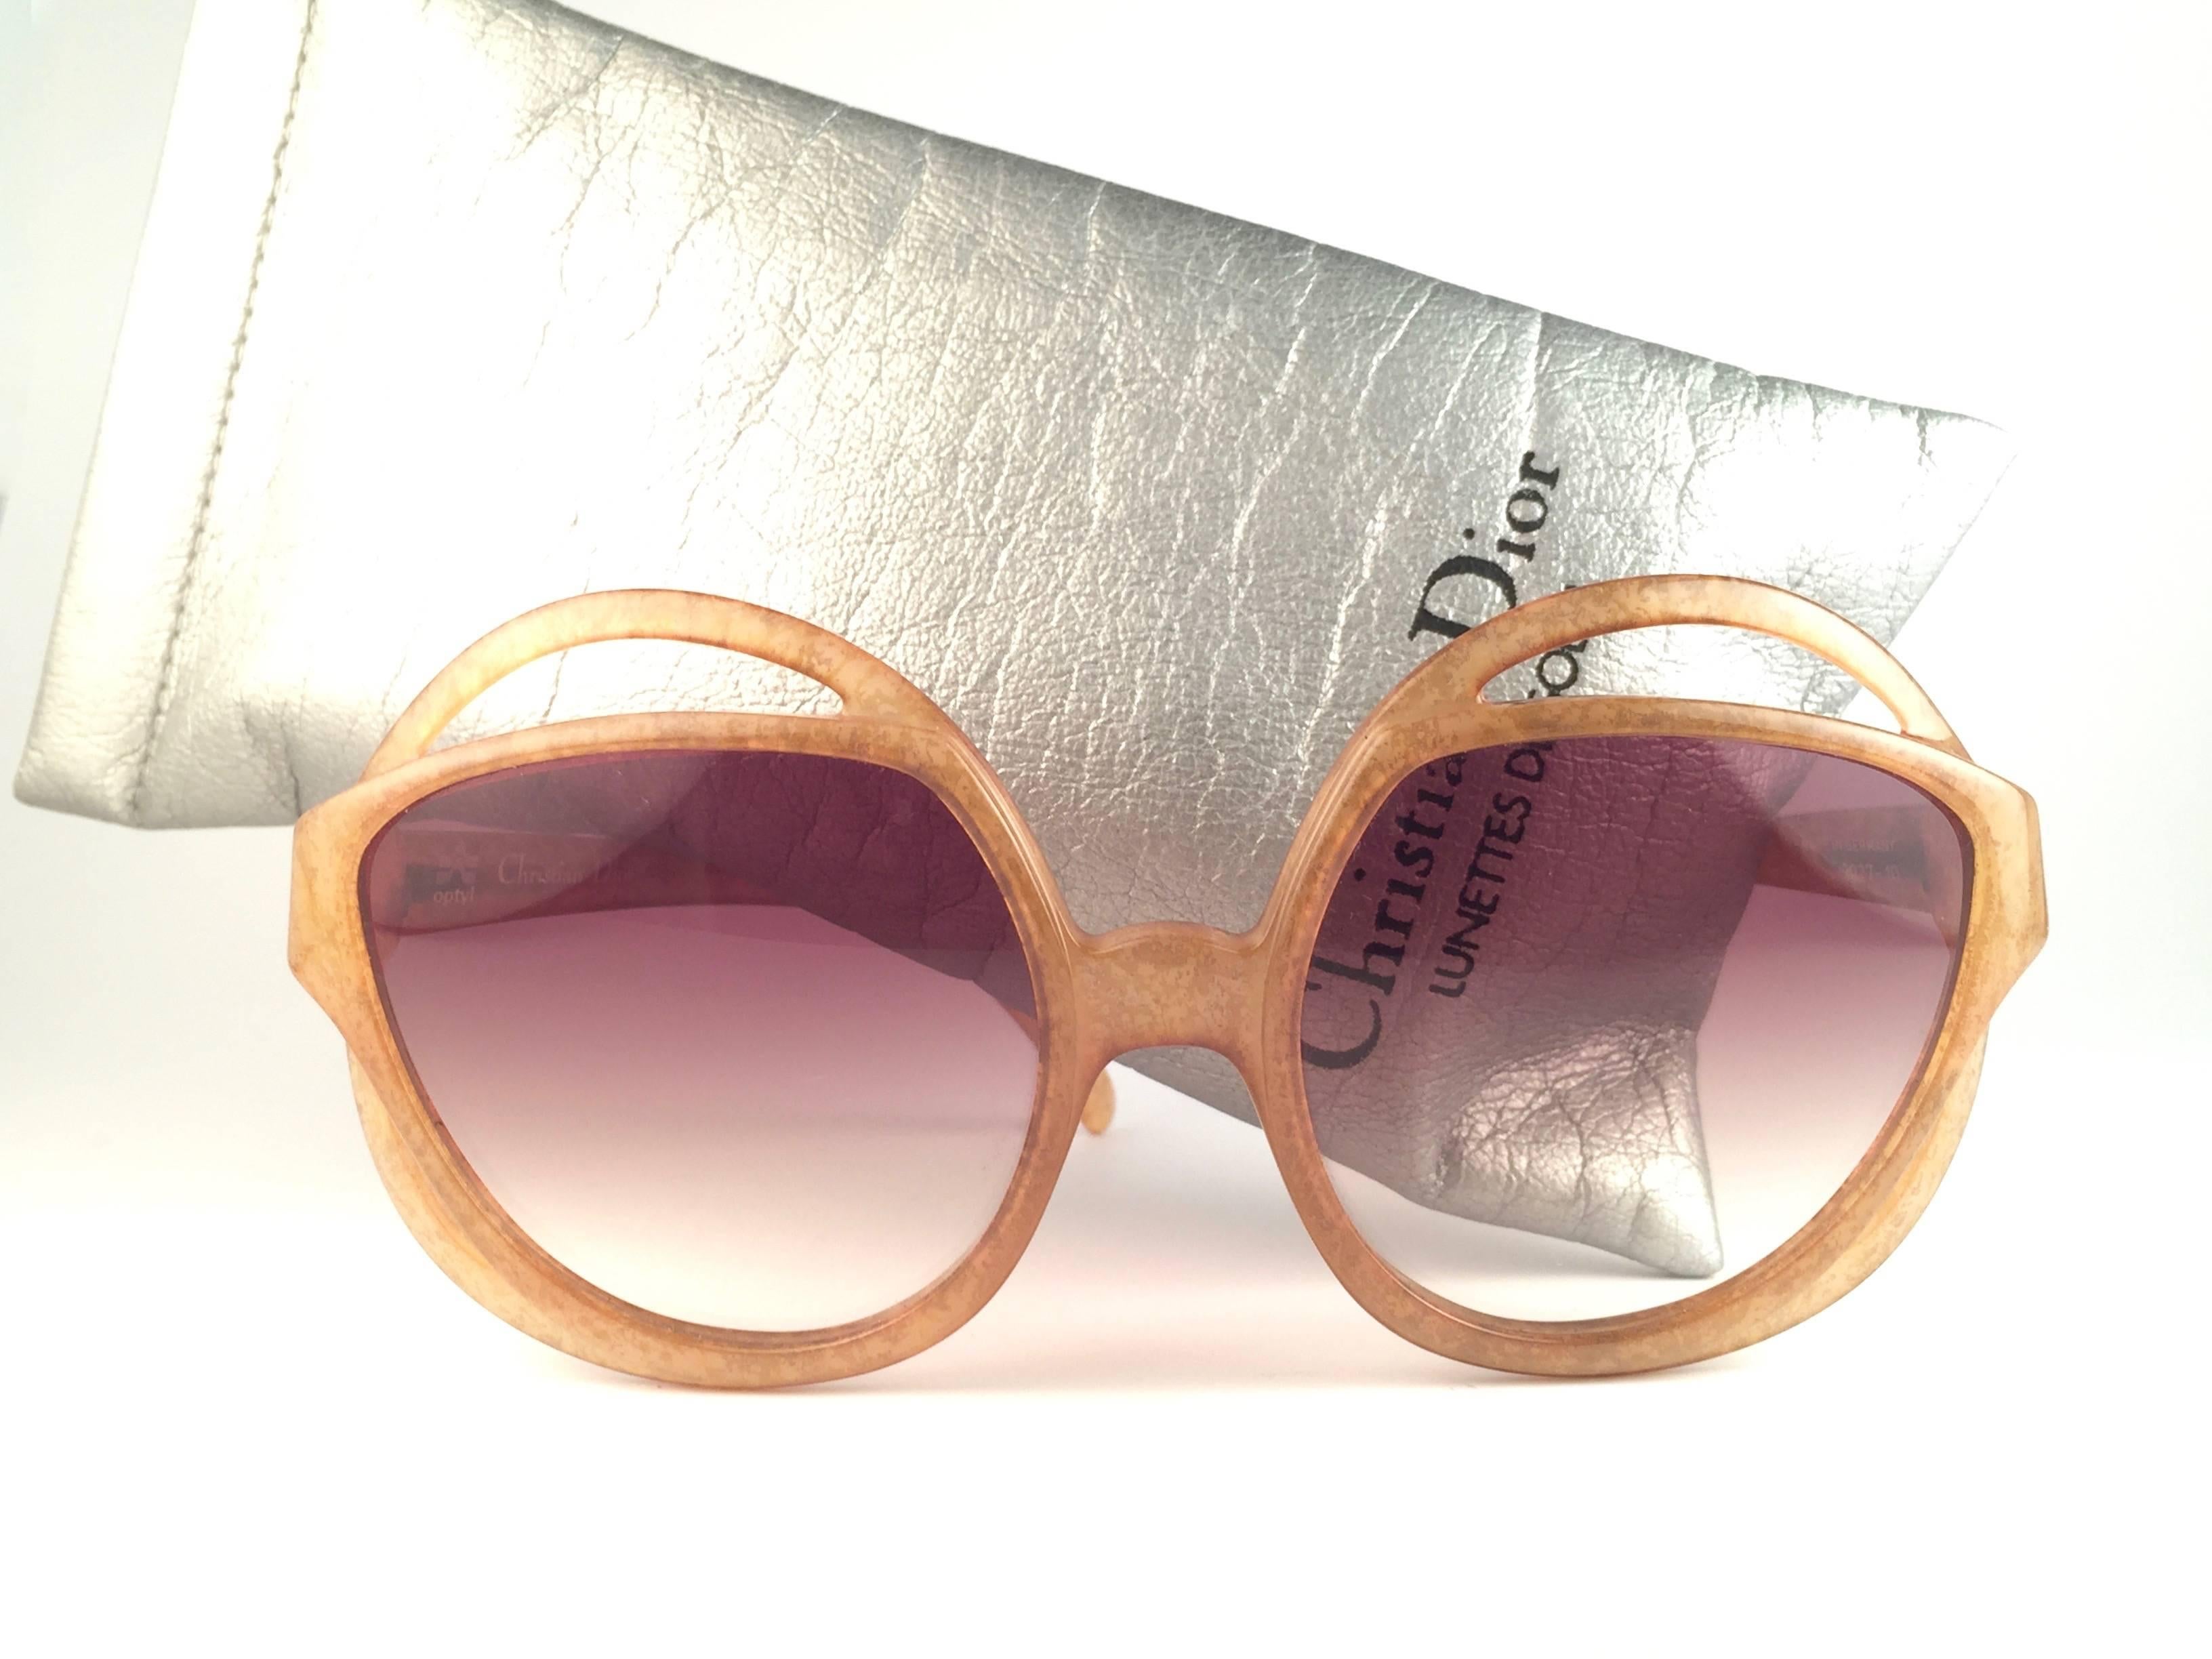 New Vintage Christian Dior 2027 10 Amber Jasped frame sporting spotless brown gradient lenses. 

Made in Germany.
 
Produced and design in 1970's.

A collector’s piece!

New, never worn or displayed. Comes with its original silver Christian Dior